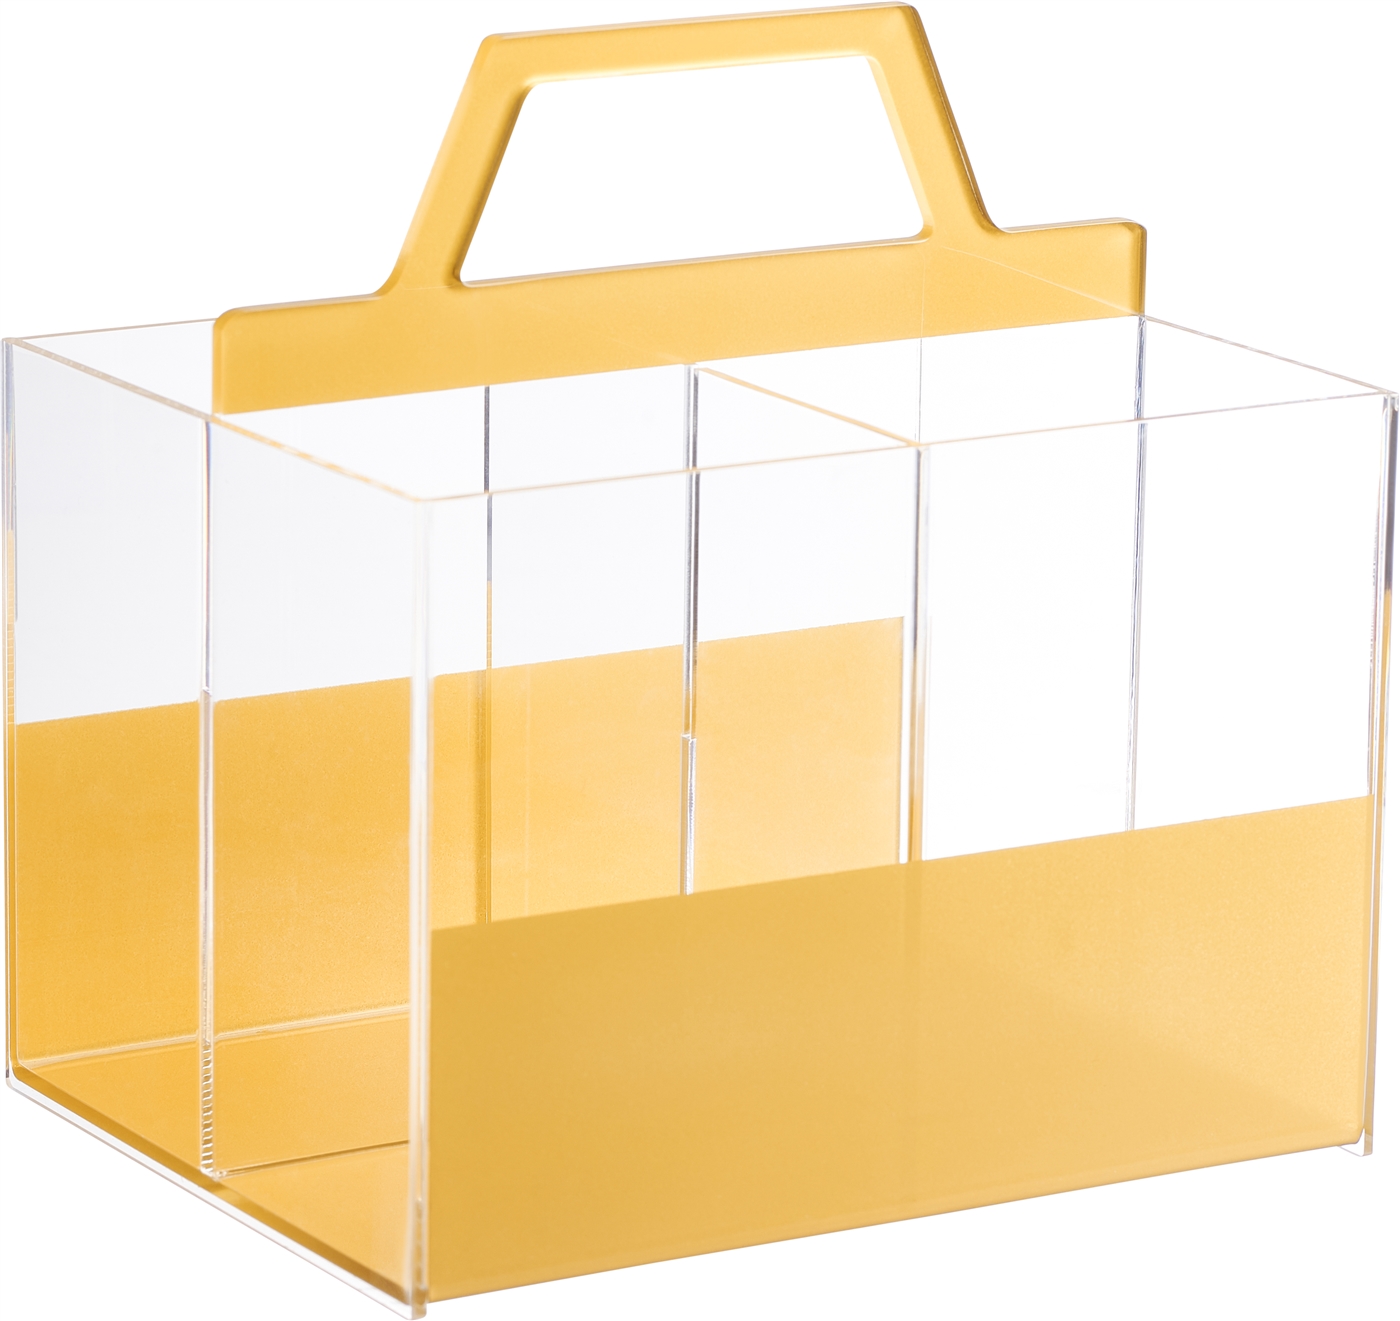 Lucite Utensil Holder with 4 compartments